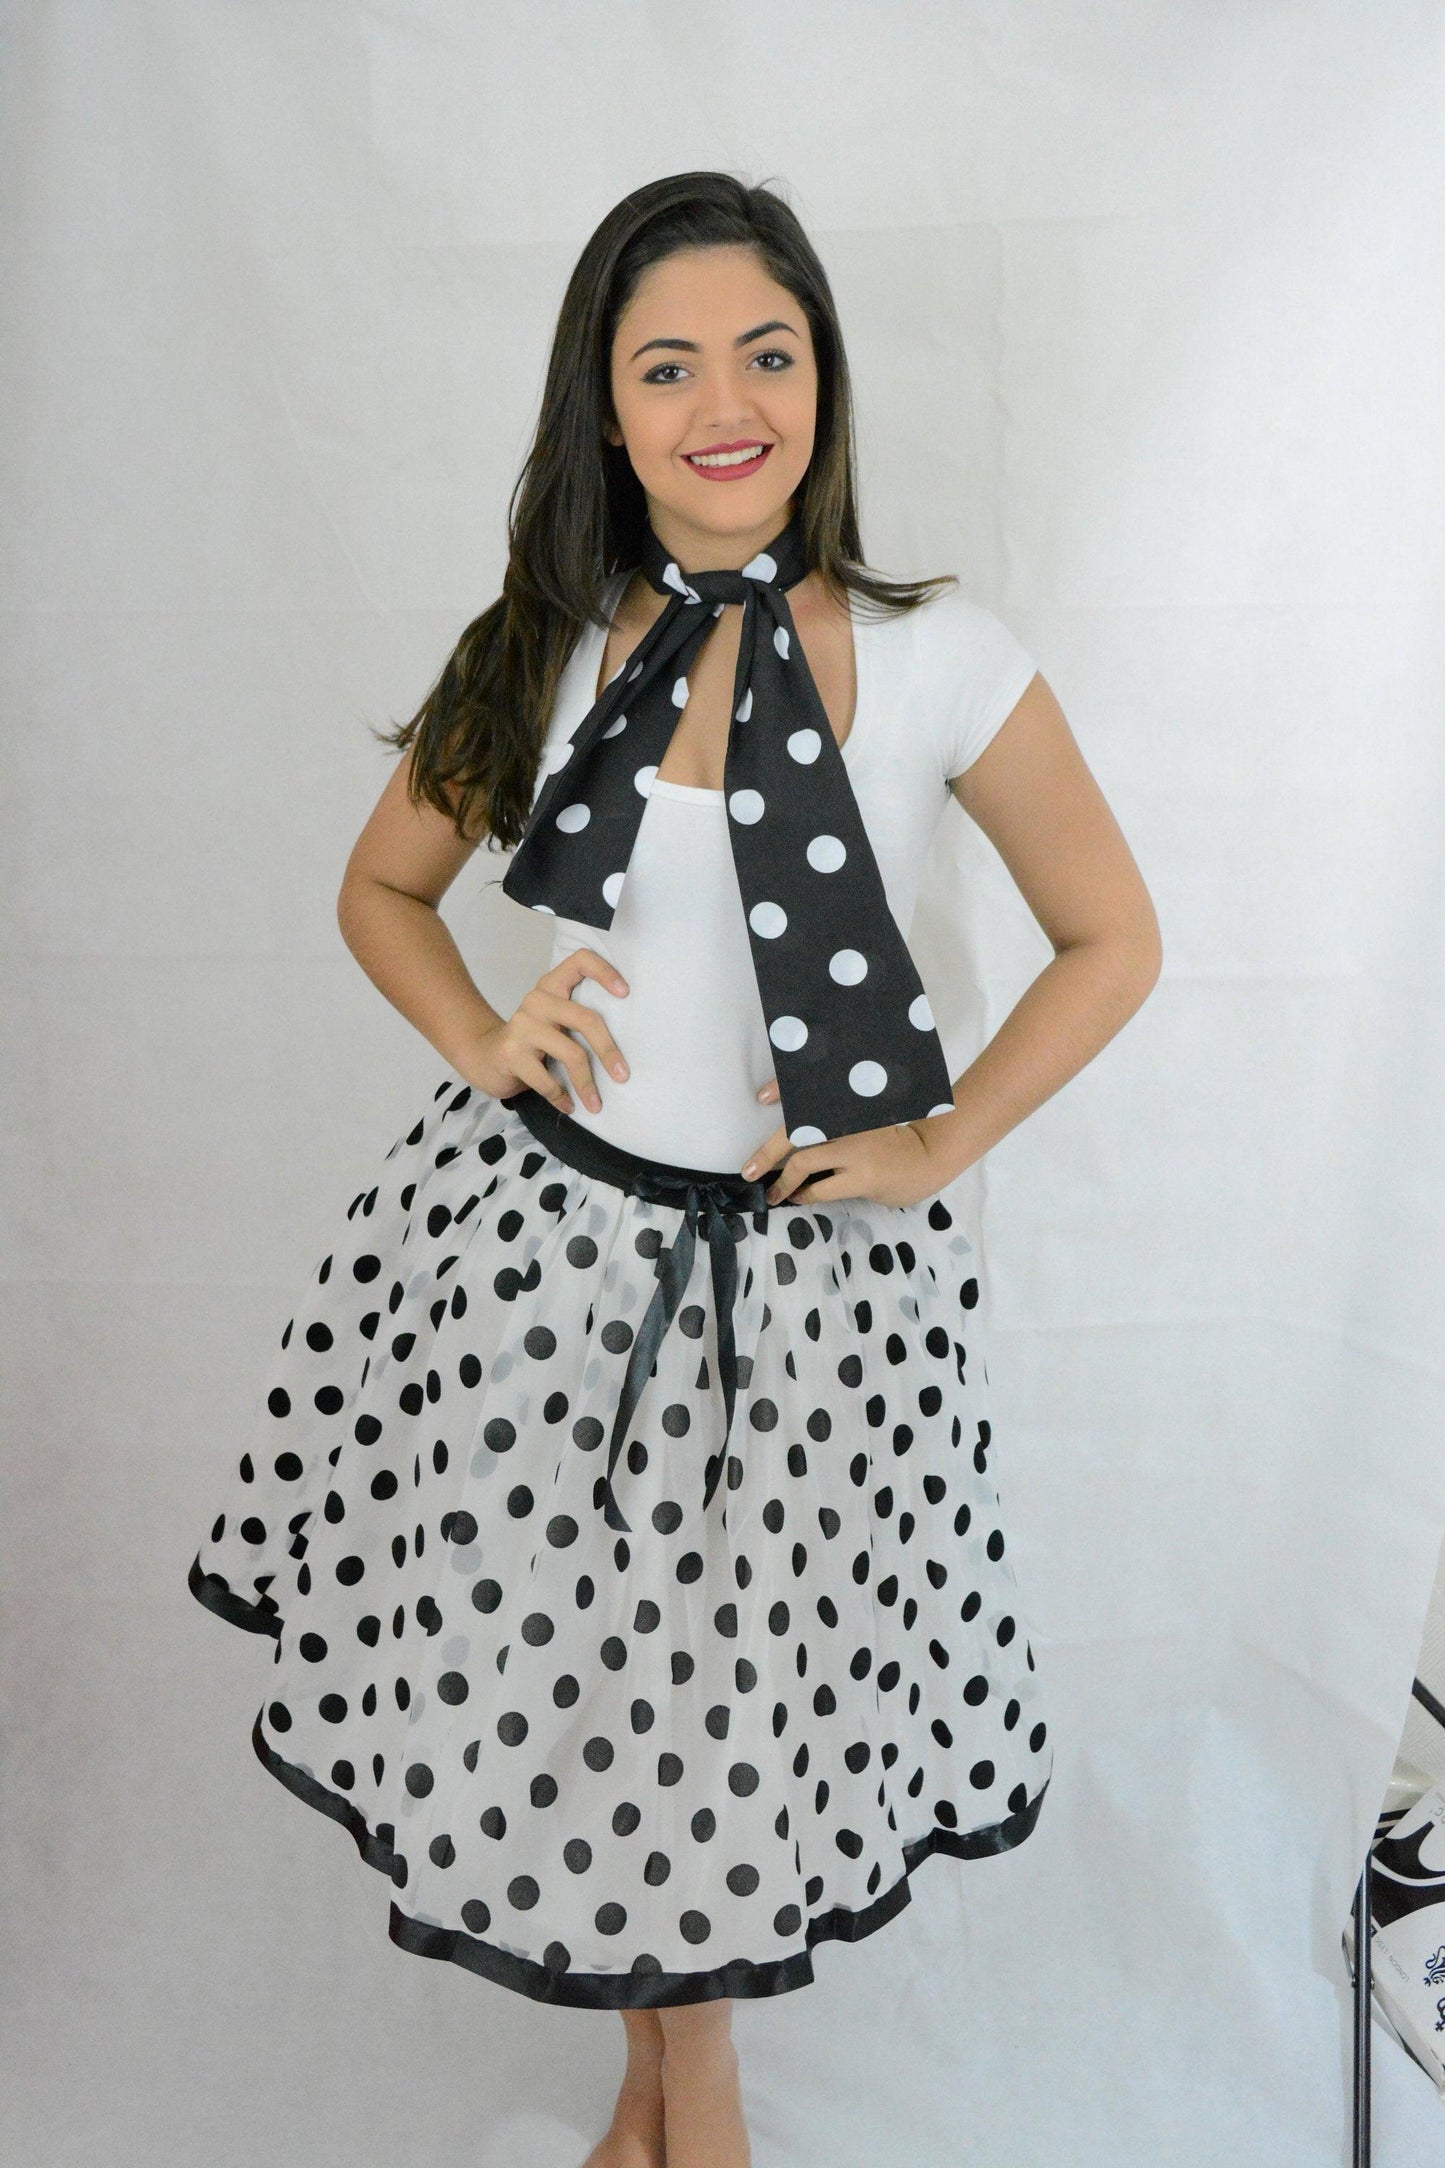 White Black Polka Dot Chiffon Skirt with Netted Petticoat (18 Inches) - Labreeze